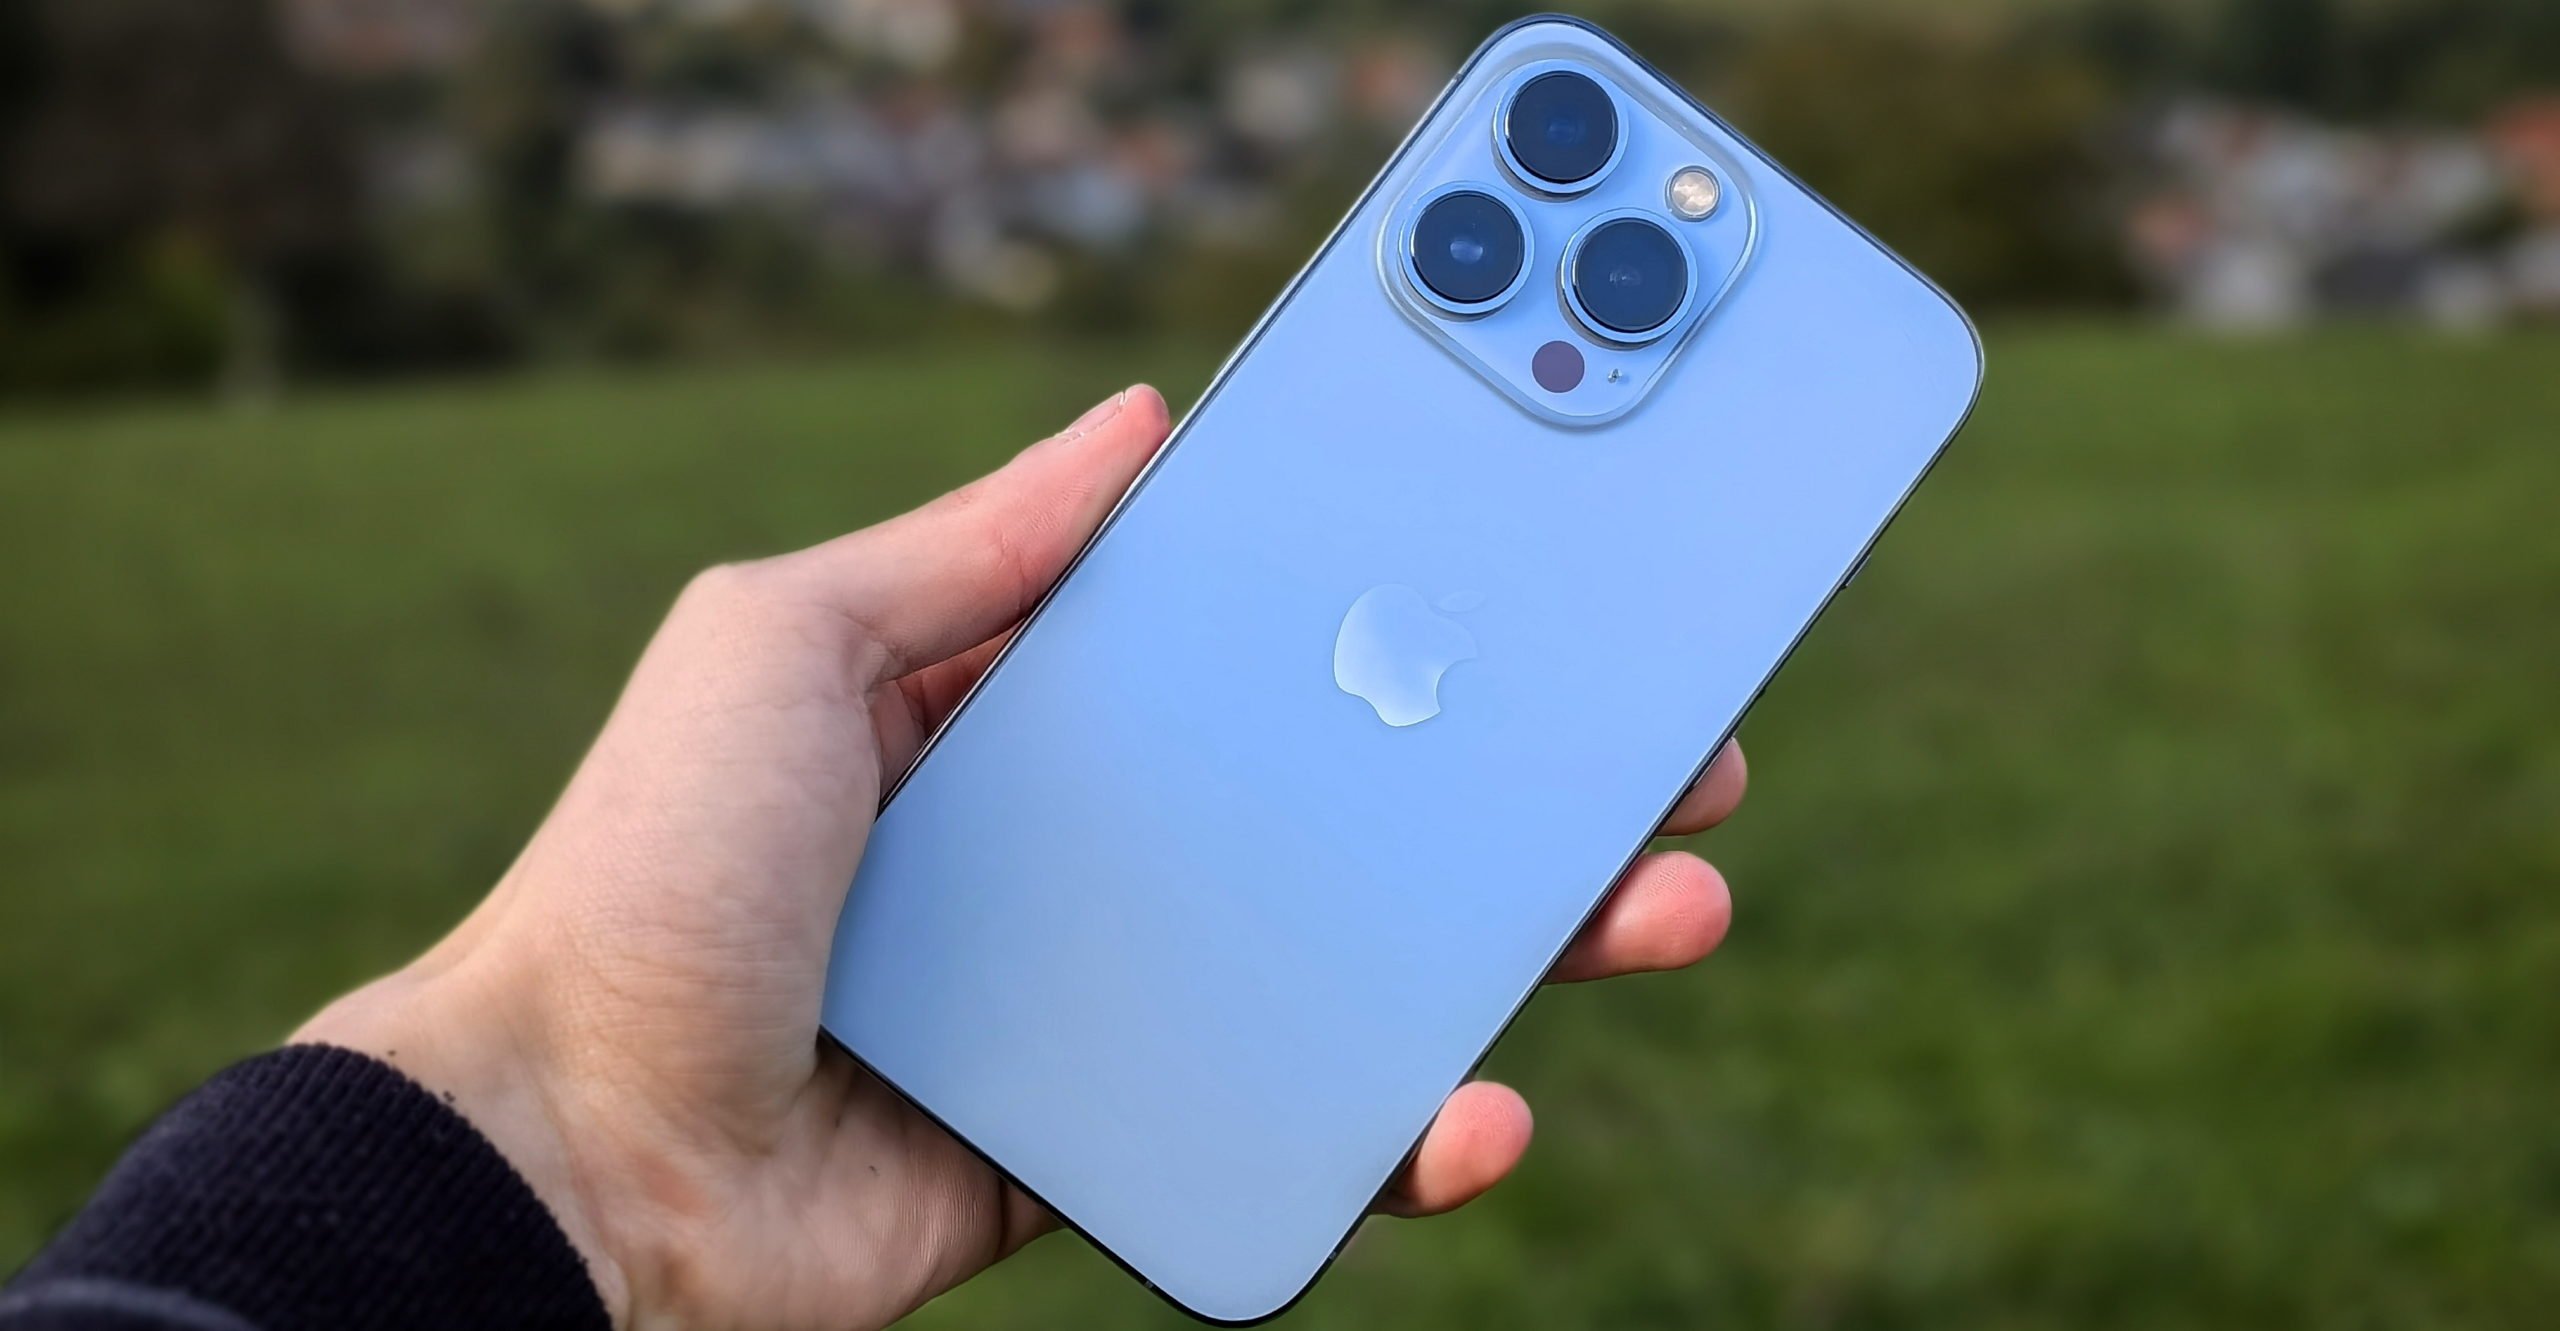 Apple iPhone 13 Pro review: Camera: Hardware, app, photo quality